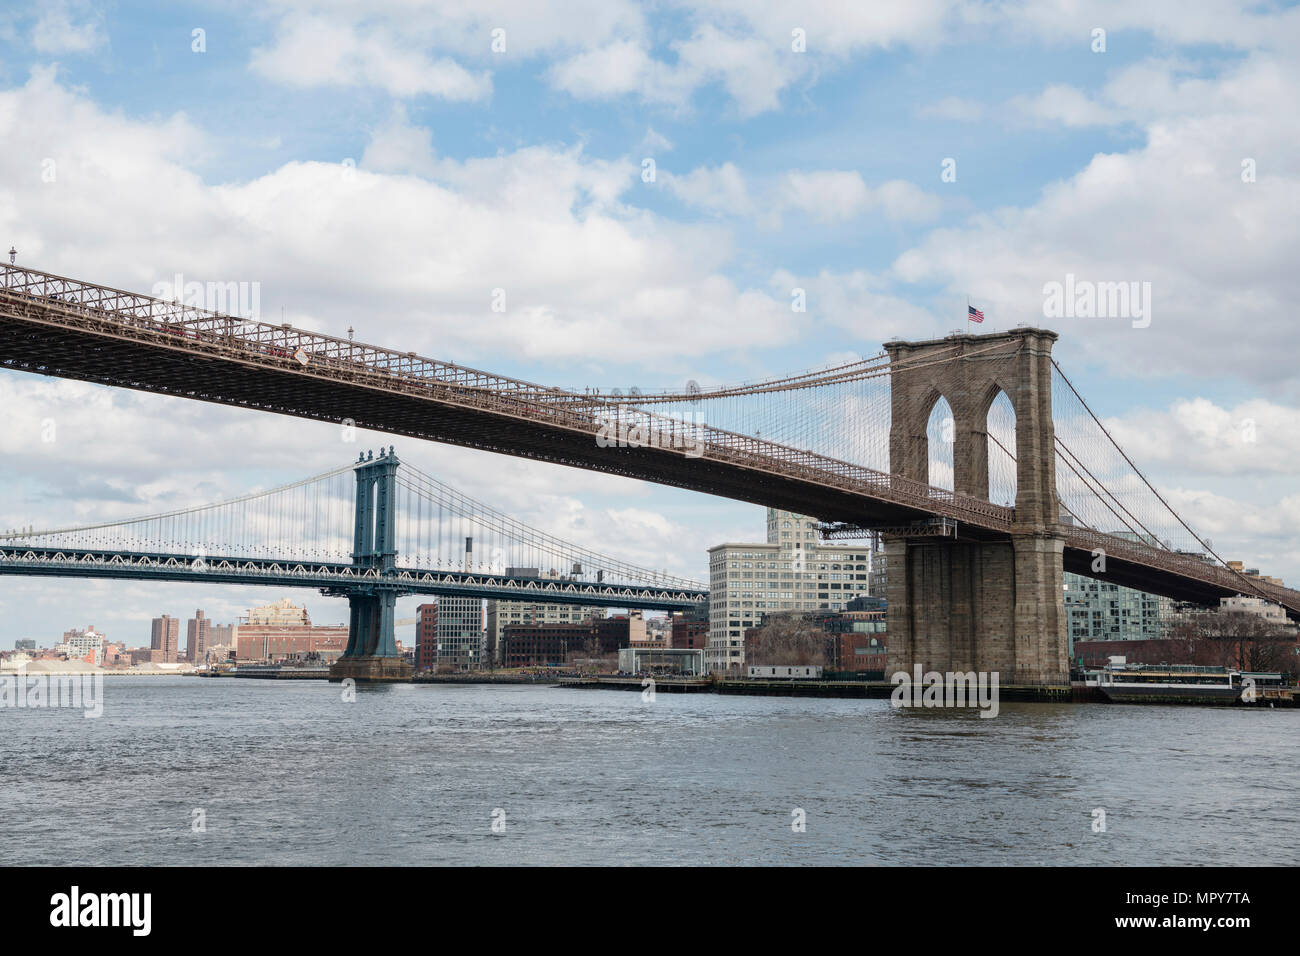 Bridges over East river against cloudy sky in city Stock Photo